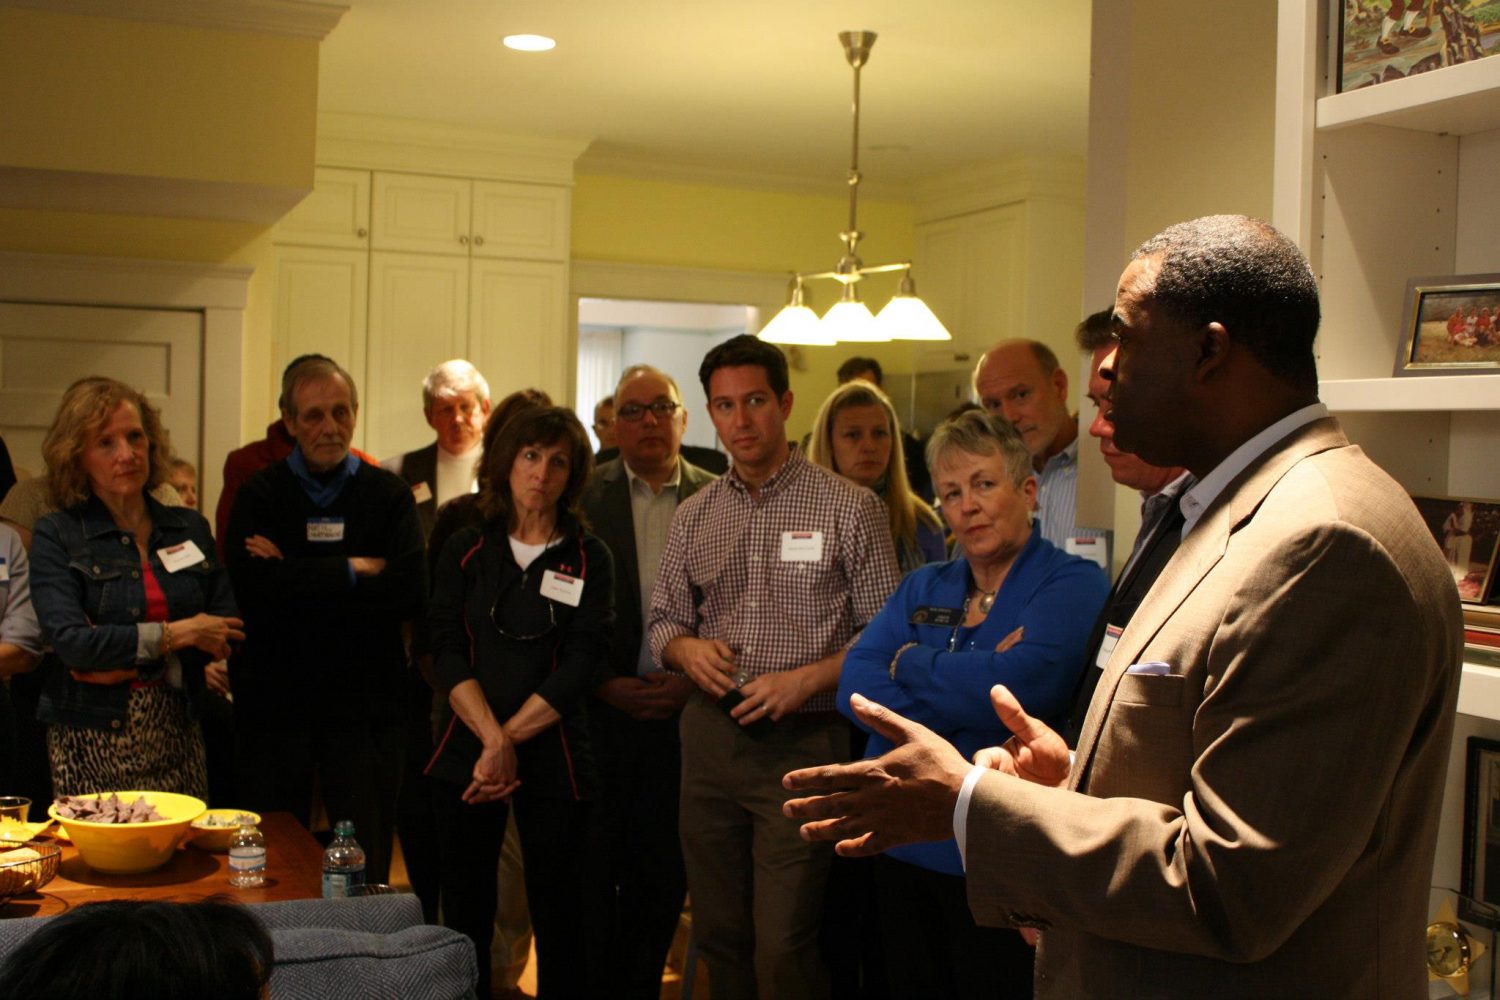 Atlanta+Mayor++Kasim+Reed+%28right%29+talks++to++attendees+of+a+fundraiser+about++his++goals++for+his+second+term.